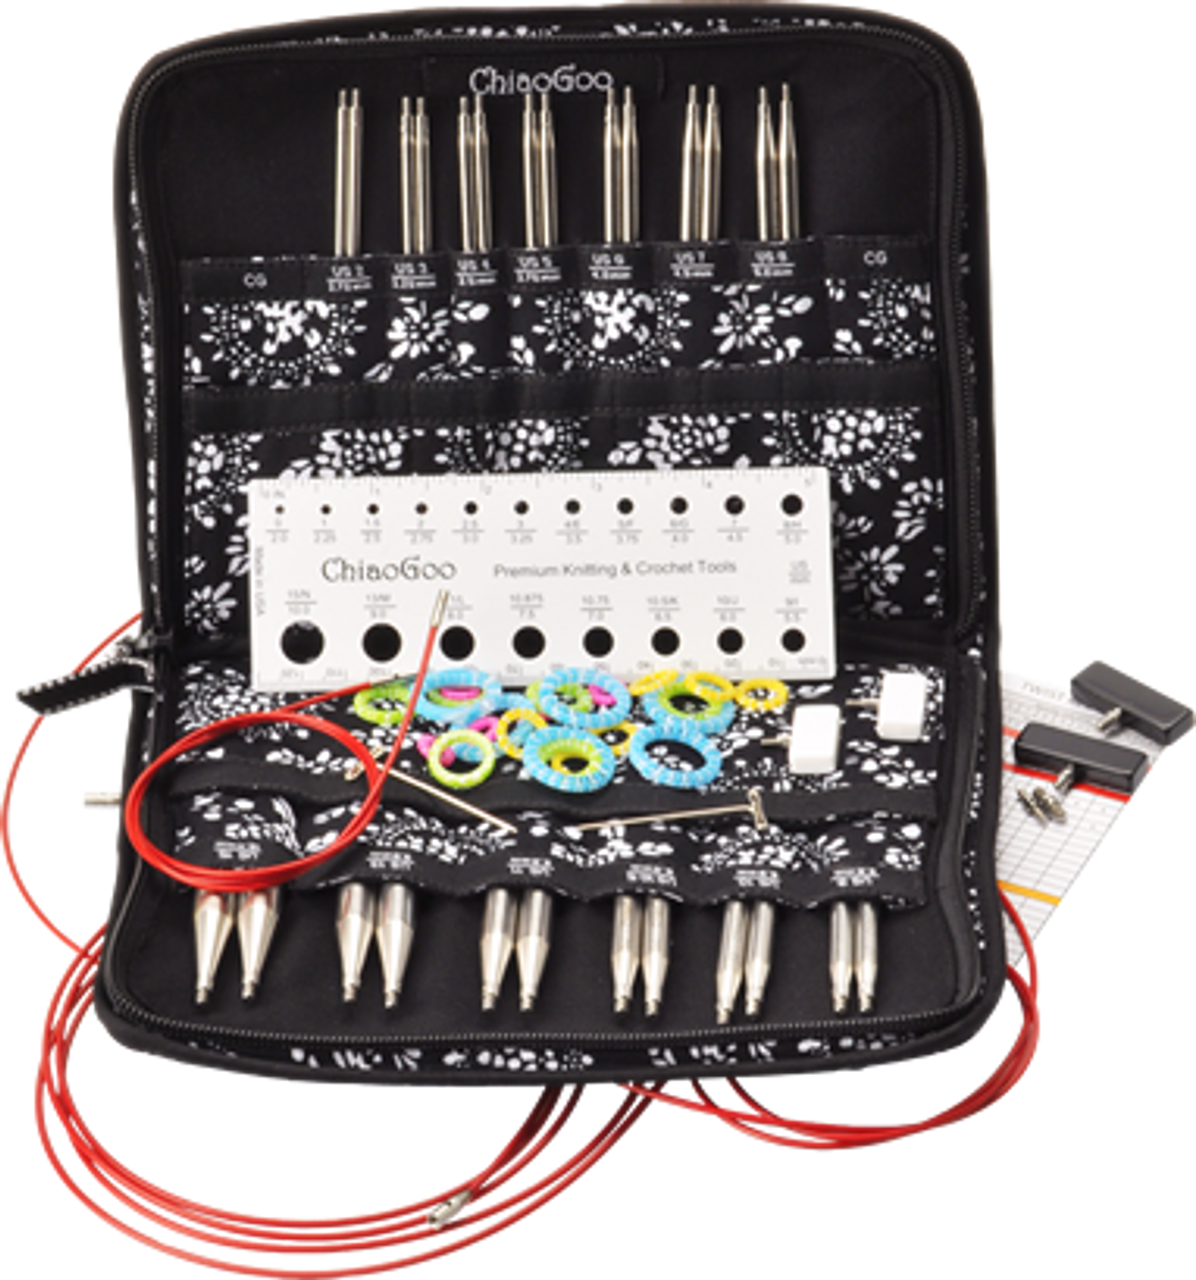 ChiaoGoo Twist Red Lace Interchangeable Knitting Needle Set Review 